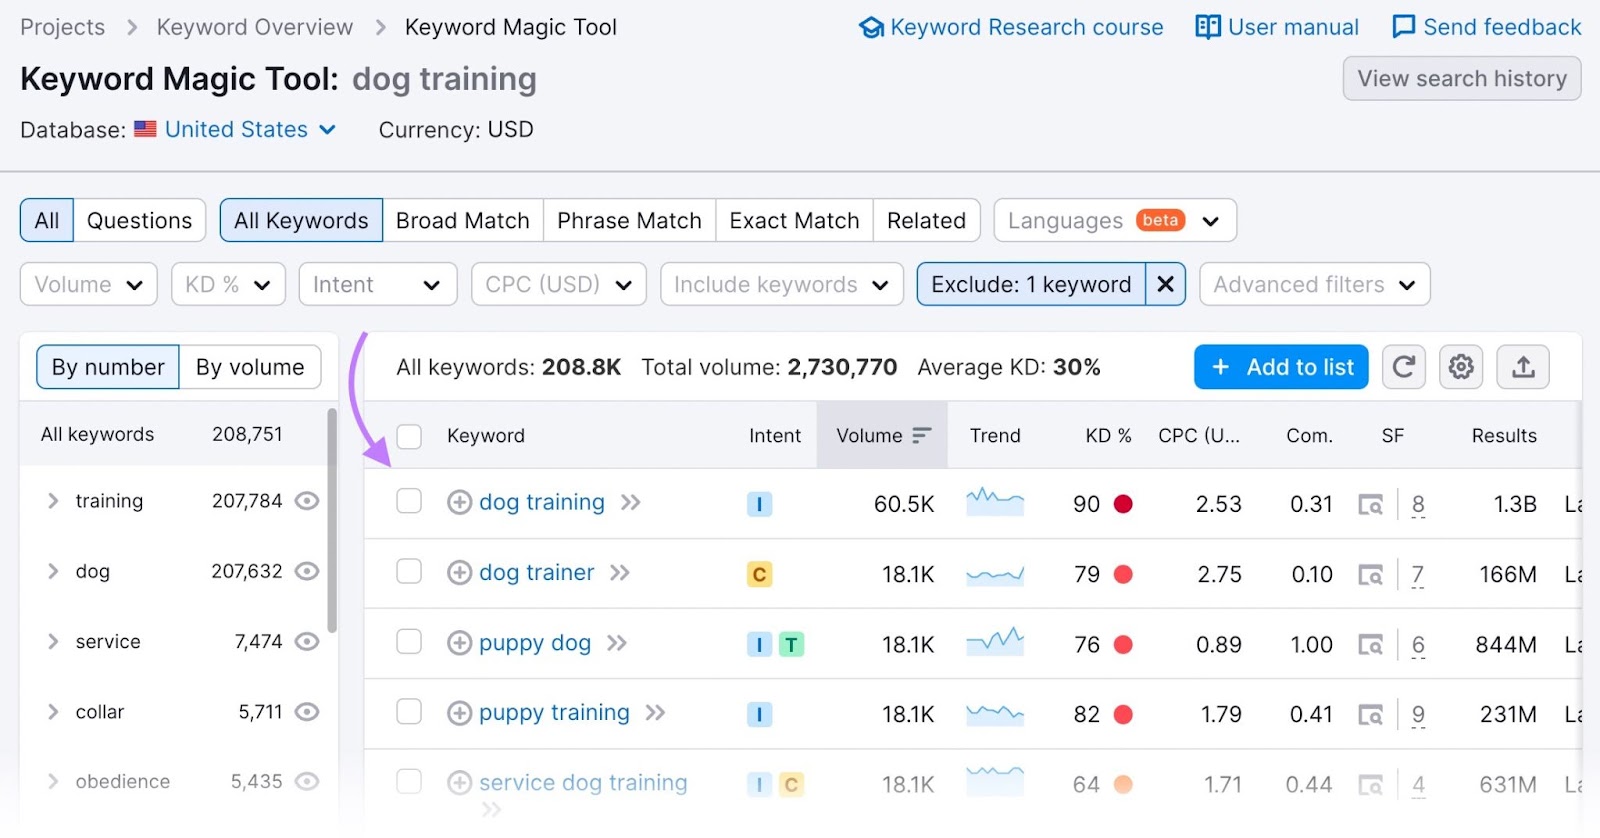 A keywords table for "dog training" search in Keyword Magic Tool